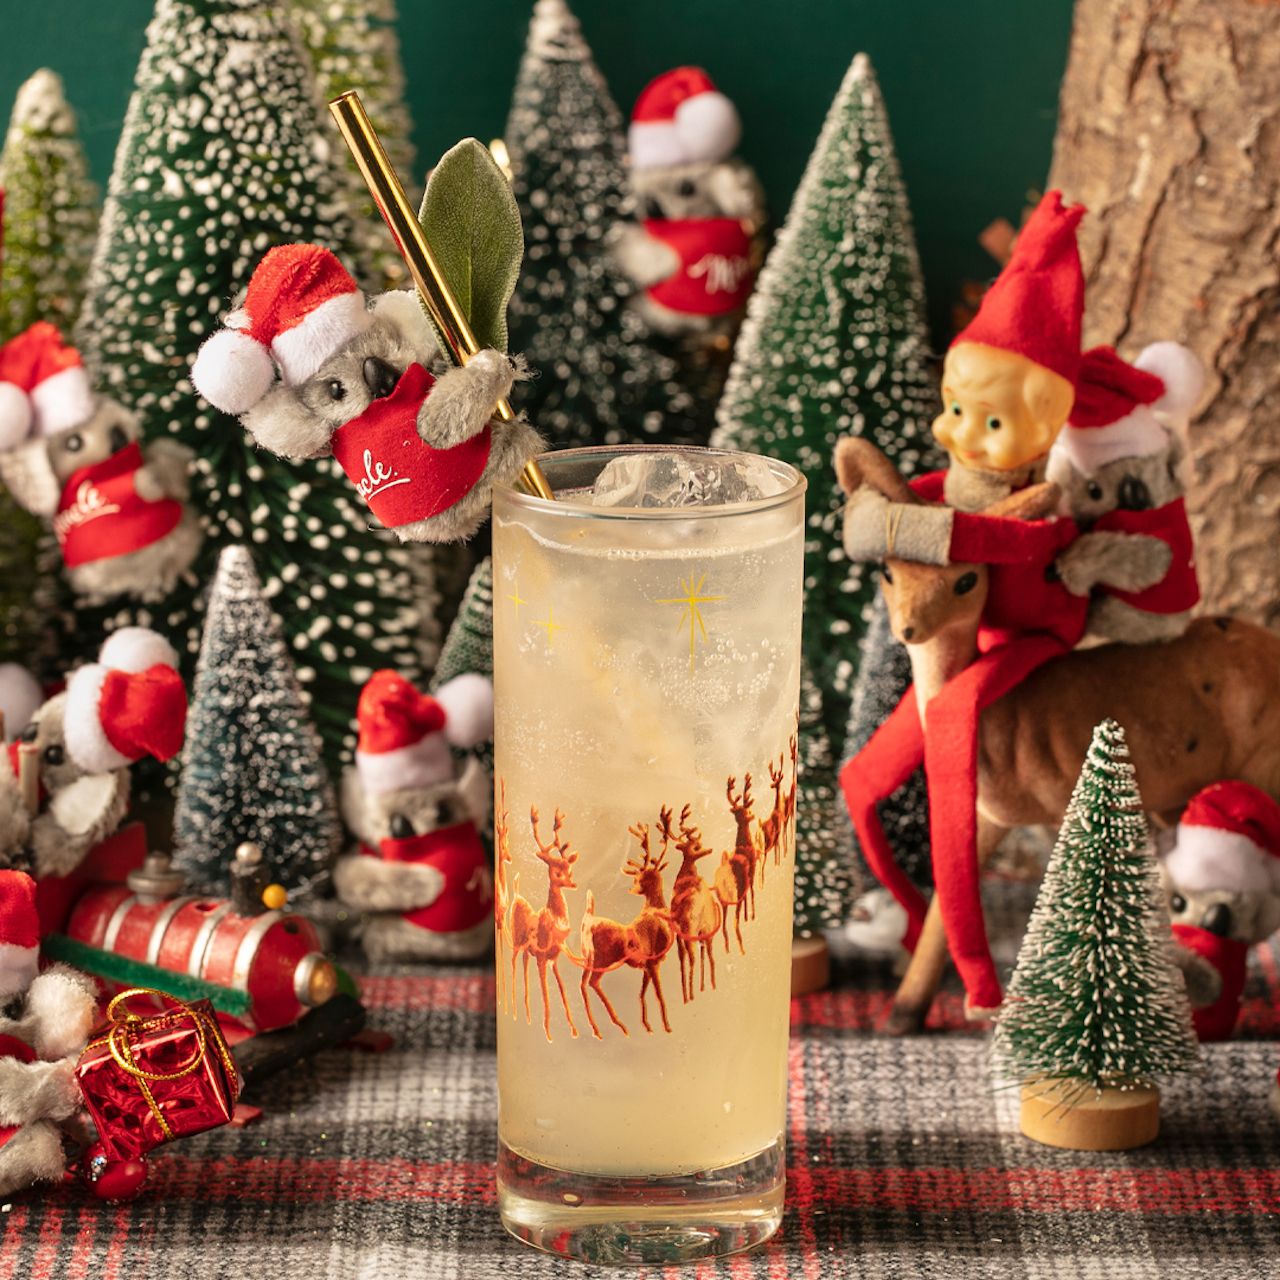 13 holiday pop-up bars in D-FW with Christmas cocktails and festive food